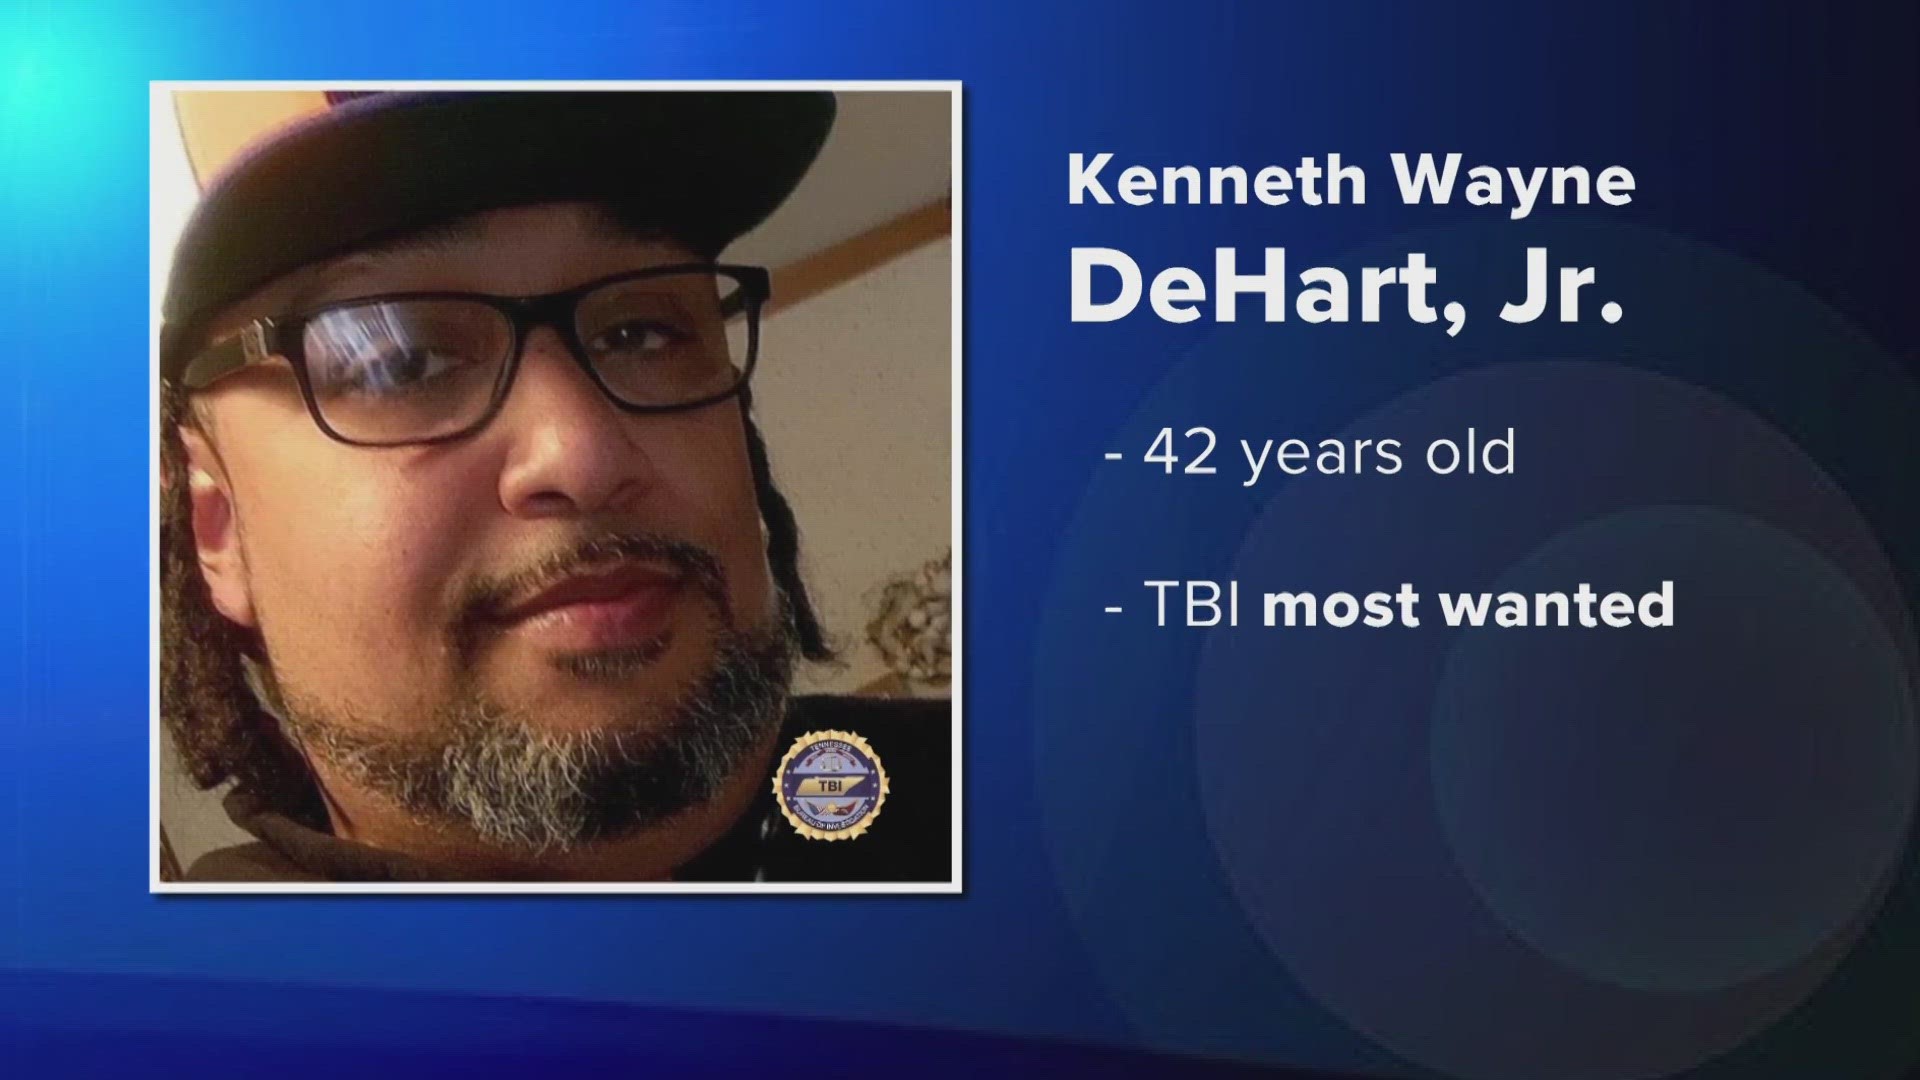 The Blount County Sheriff's Office said Kenneth Wayne DeHart Jr. remains at large and is considered armed and extremely dangerous.